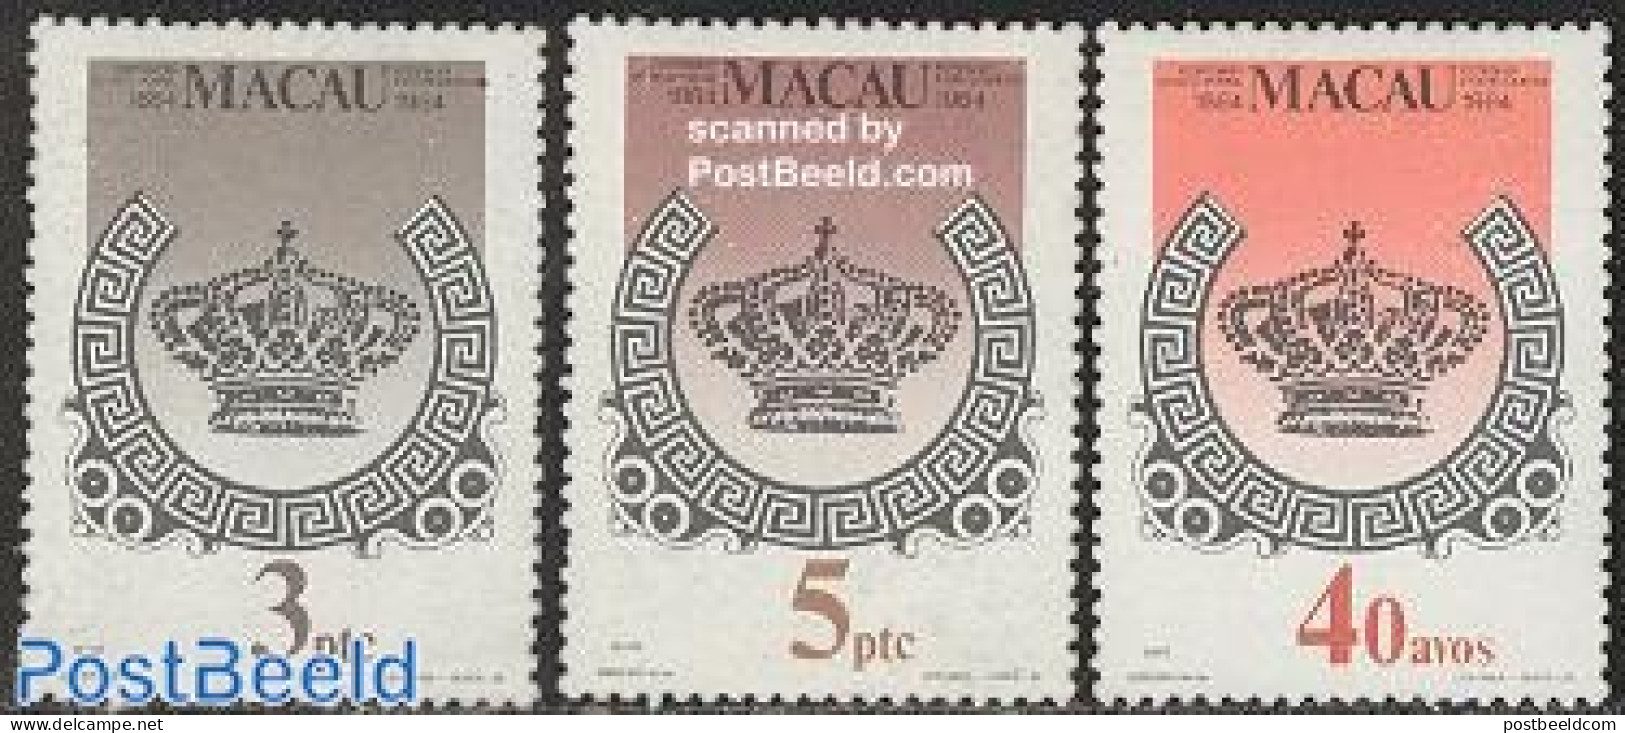 Macao 1984 Stamp Centenary 3v, Mint NH, 100 Years Stamps - Post - Stamps On Stamps - Nuovi